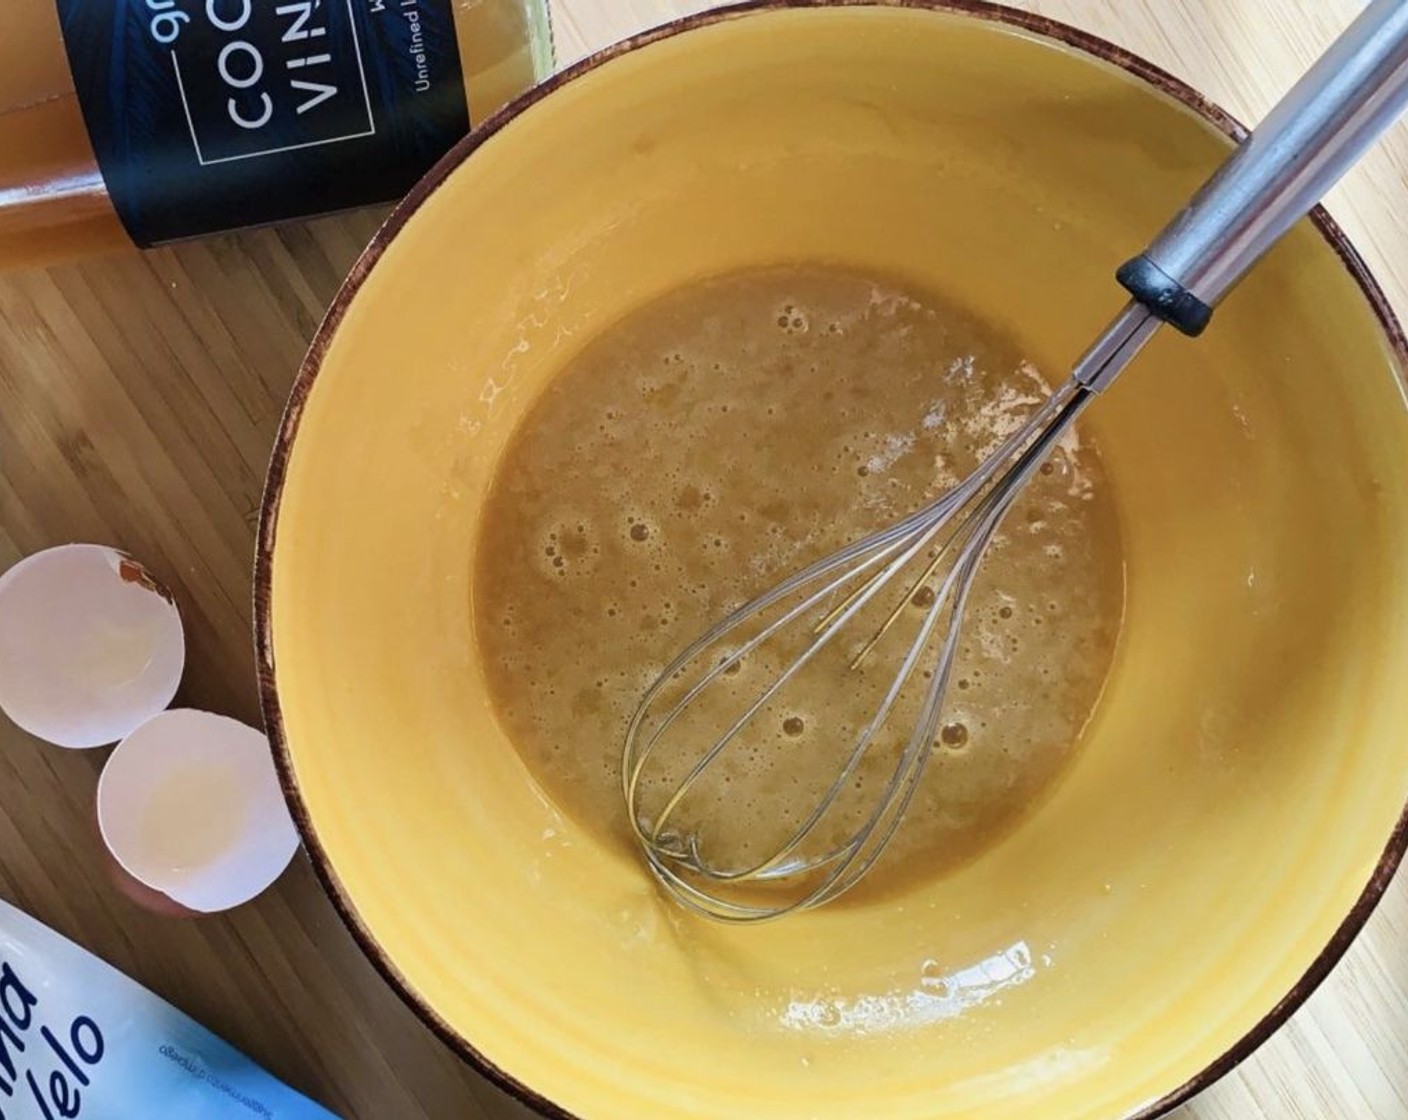 step 1 In a bowl, whisk together the Egg (1), Coconut Oil (2 oz), Coconut Vinegar (1 Tbsp), and Brown Sugar (1/4 cup).